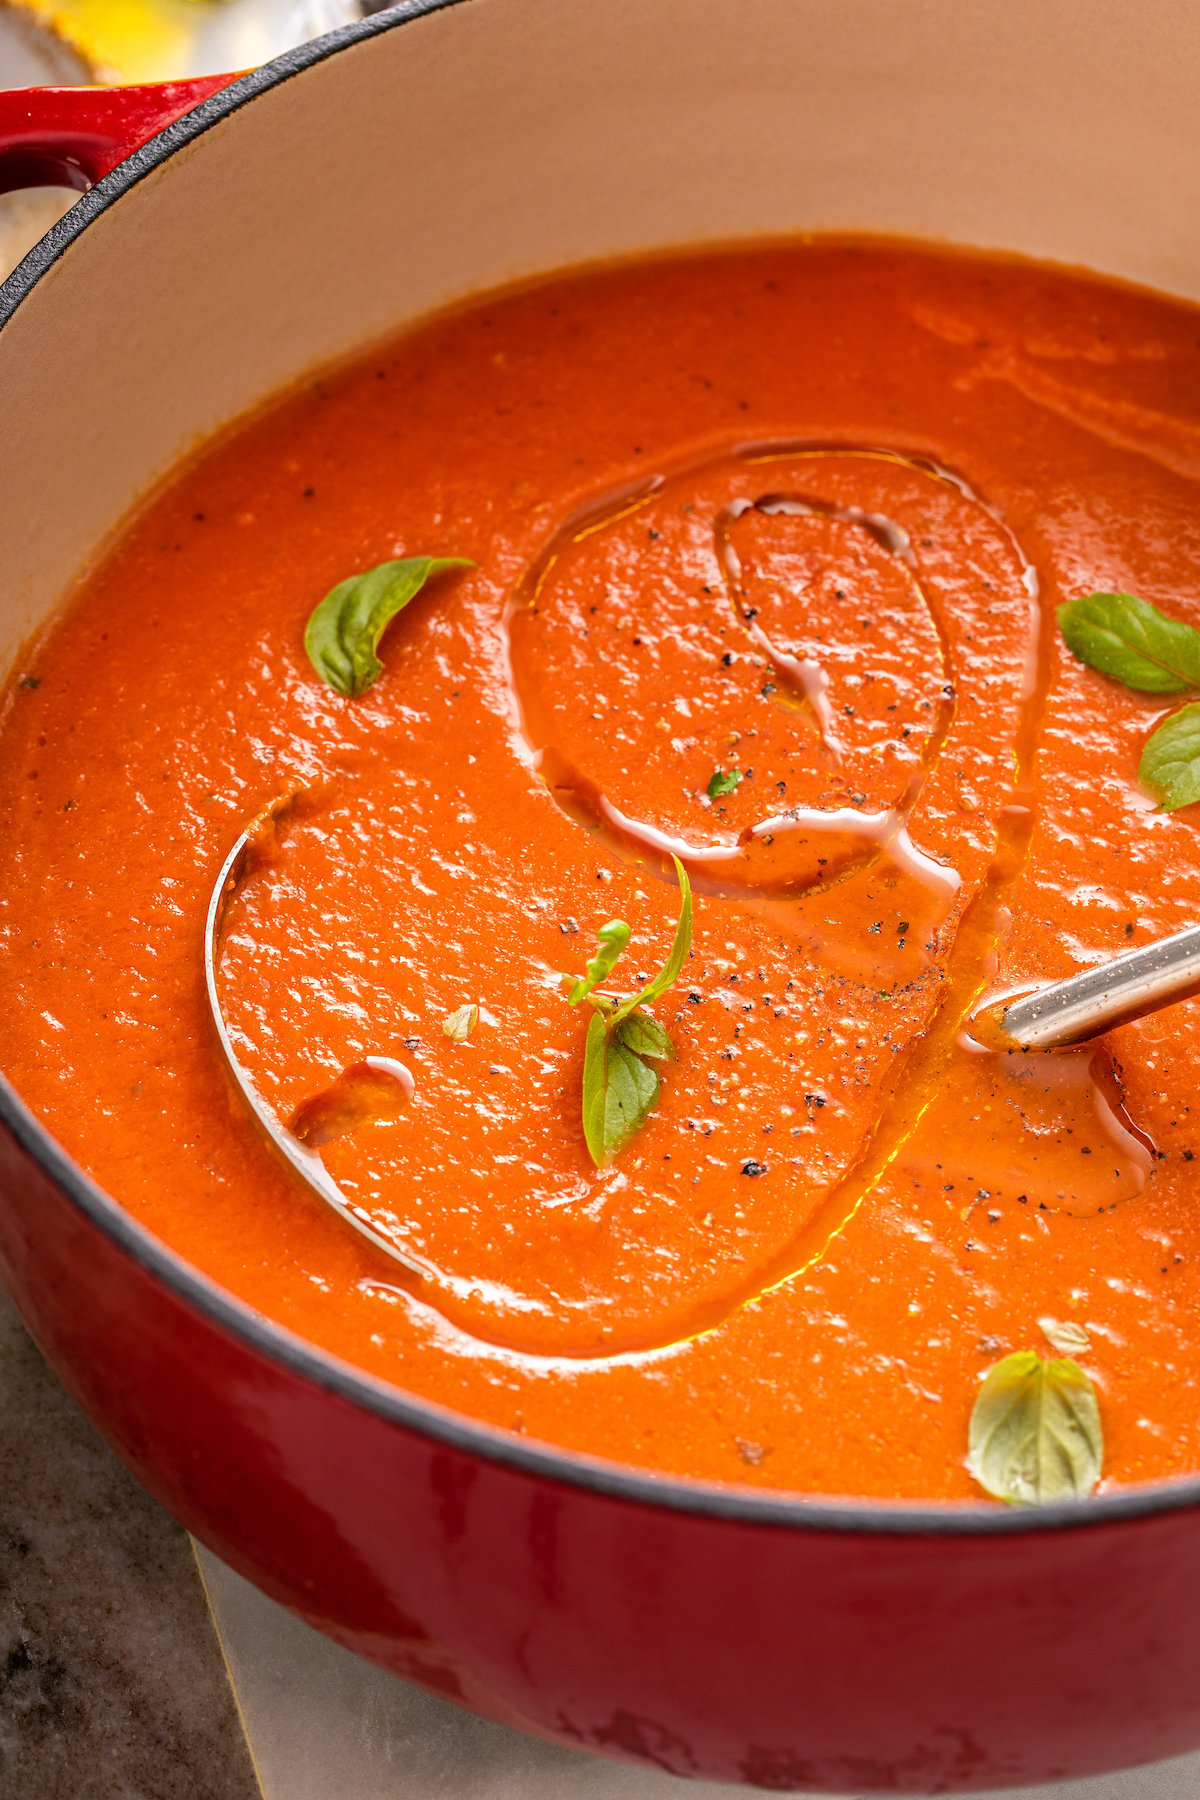 Creamy tomato soup topped wit herbs.